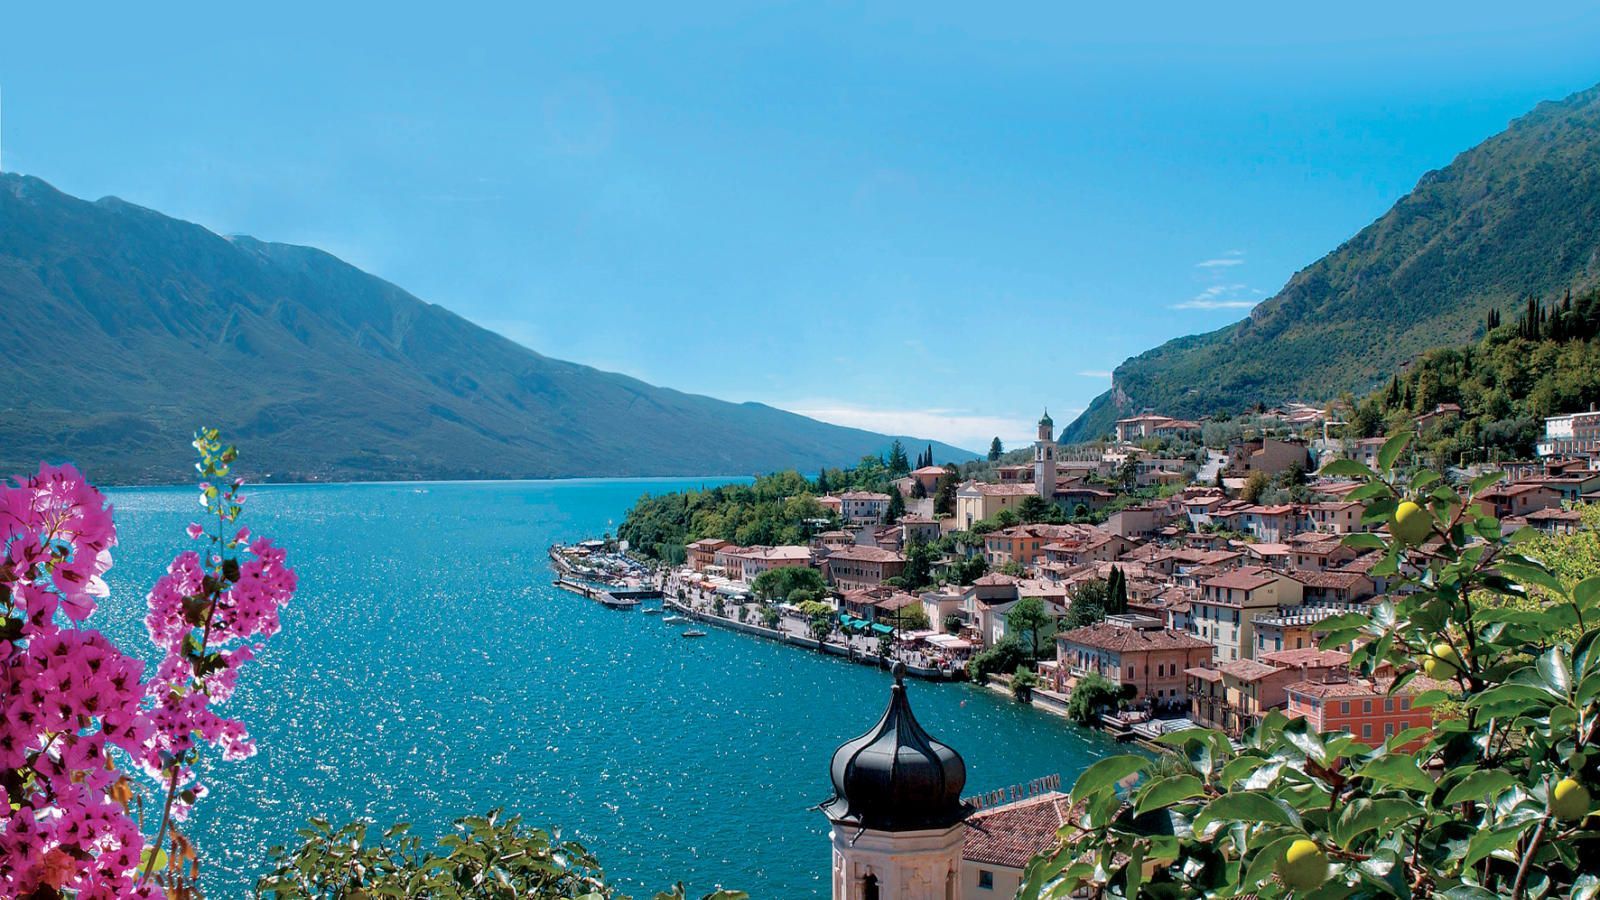 Hugging The North West Shores Of The Lake, Limone Is A Beautiful